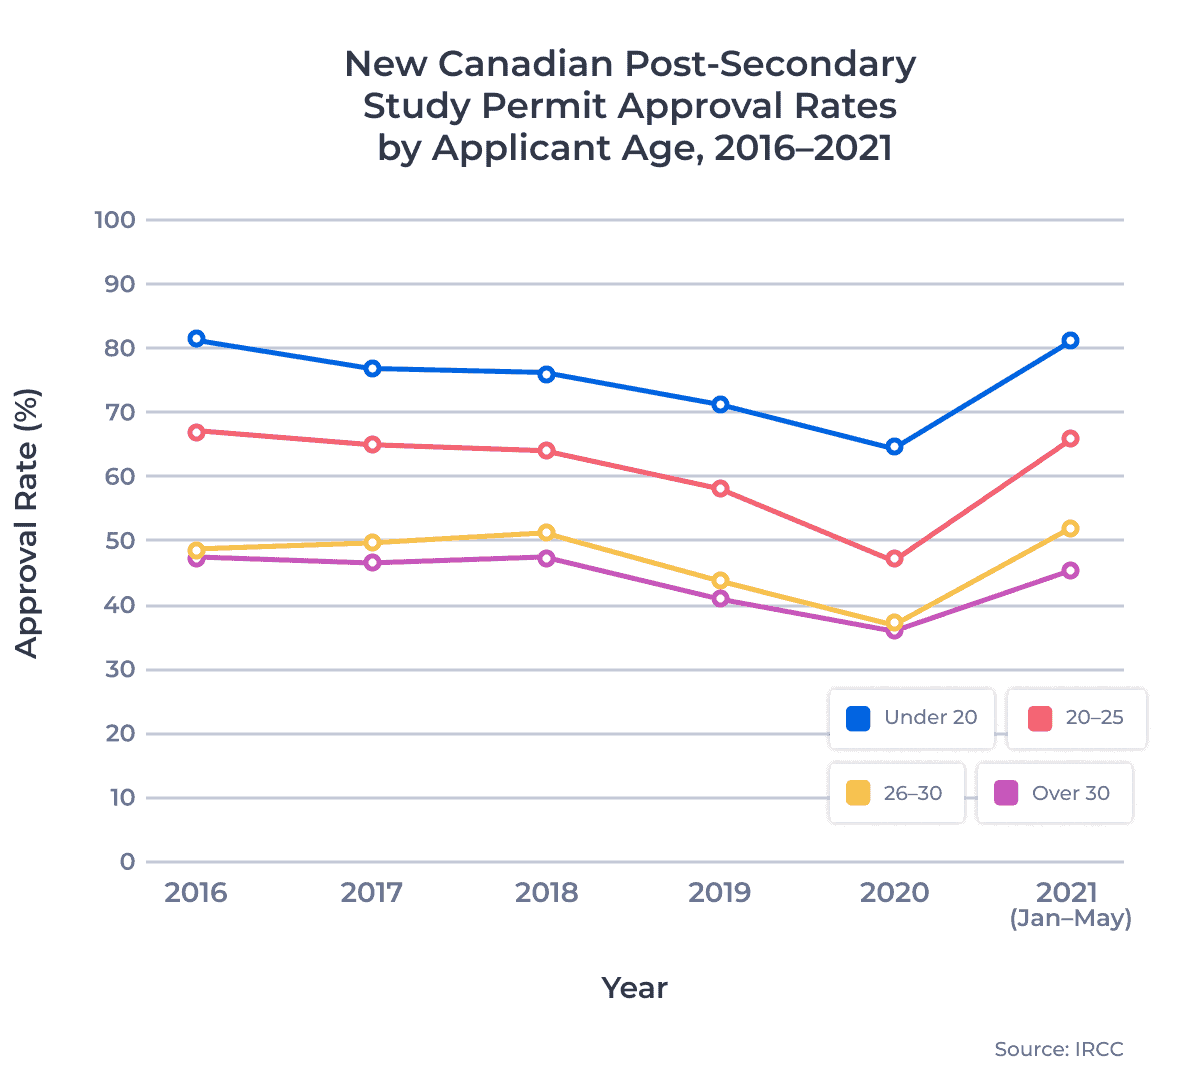 New Canadian Post-Secondary Study Permit Approval Rates by Applicant Age 2017–2021